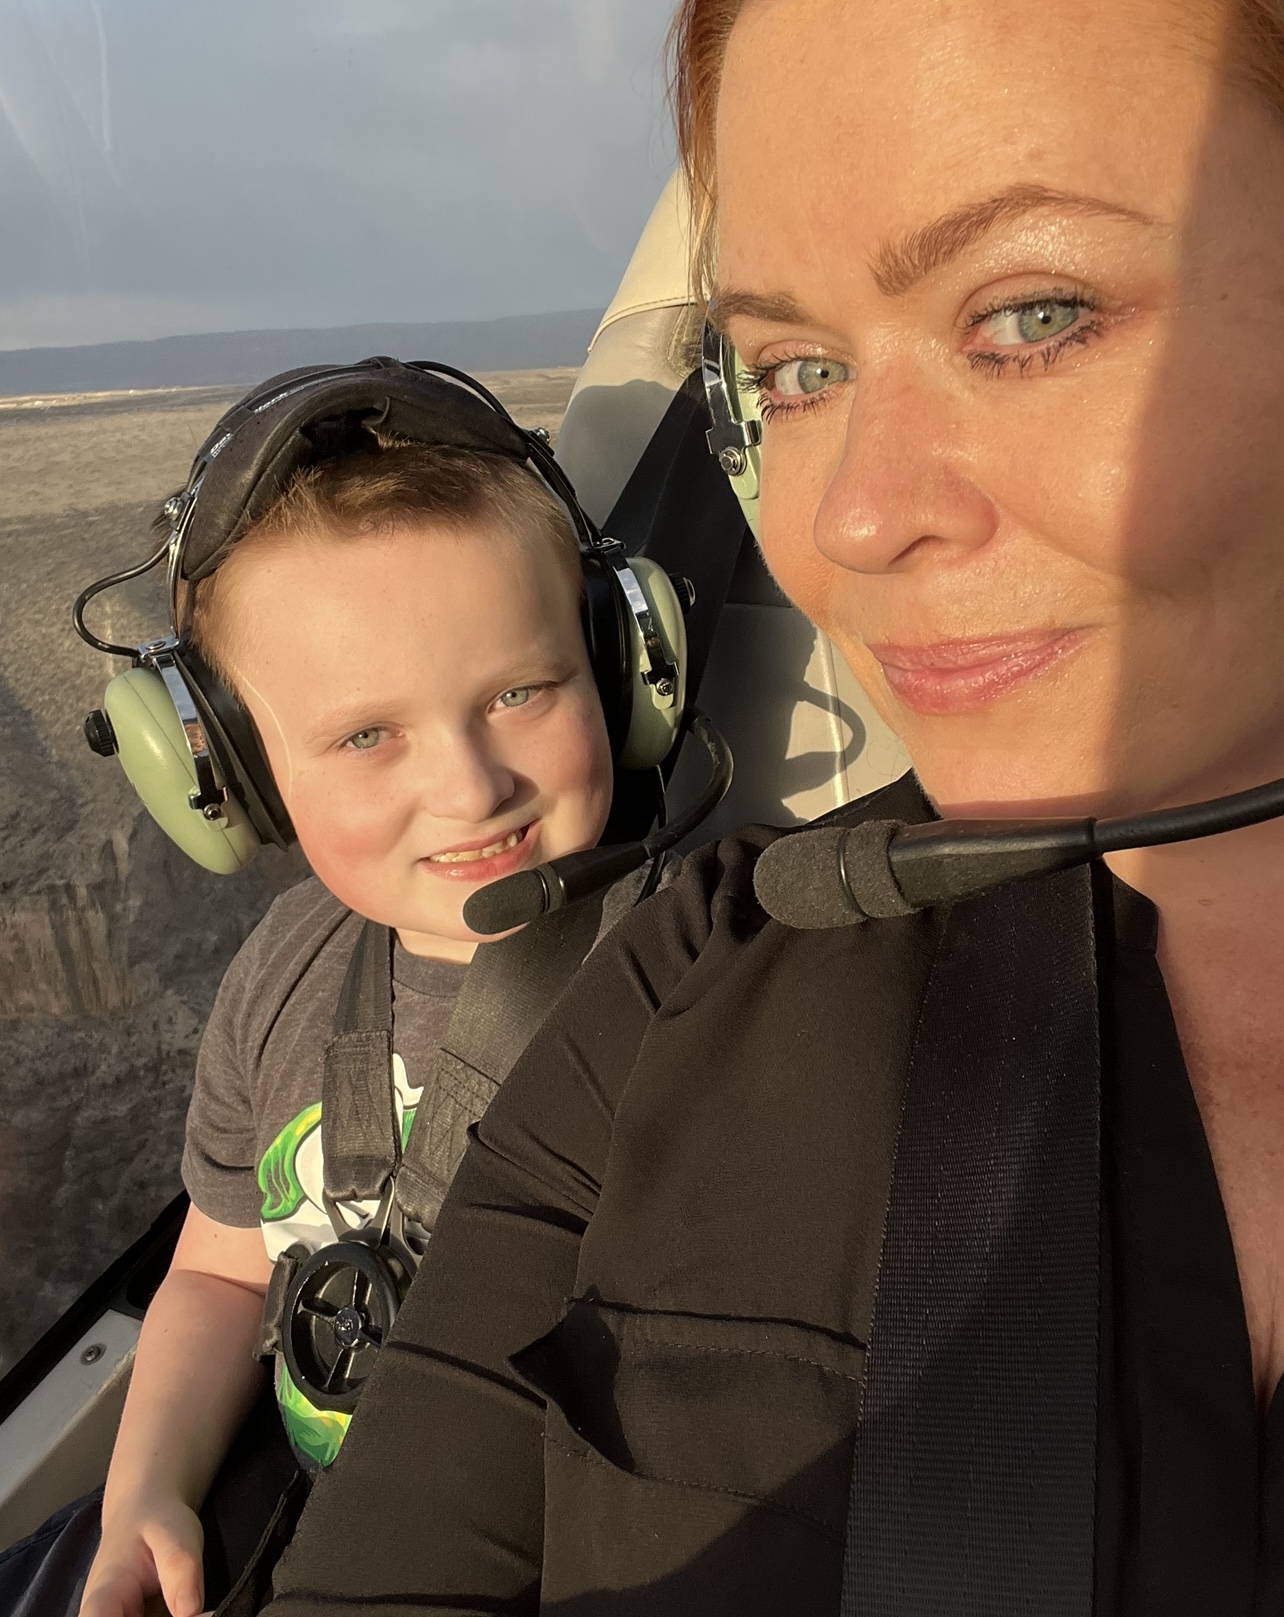 vegas starfish with her son on helicopter ride in vegas